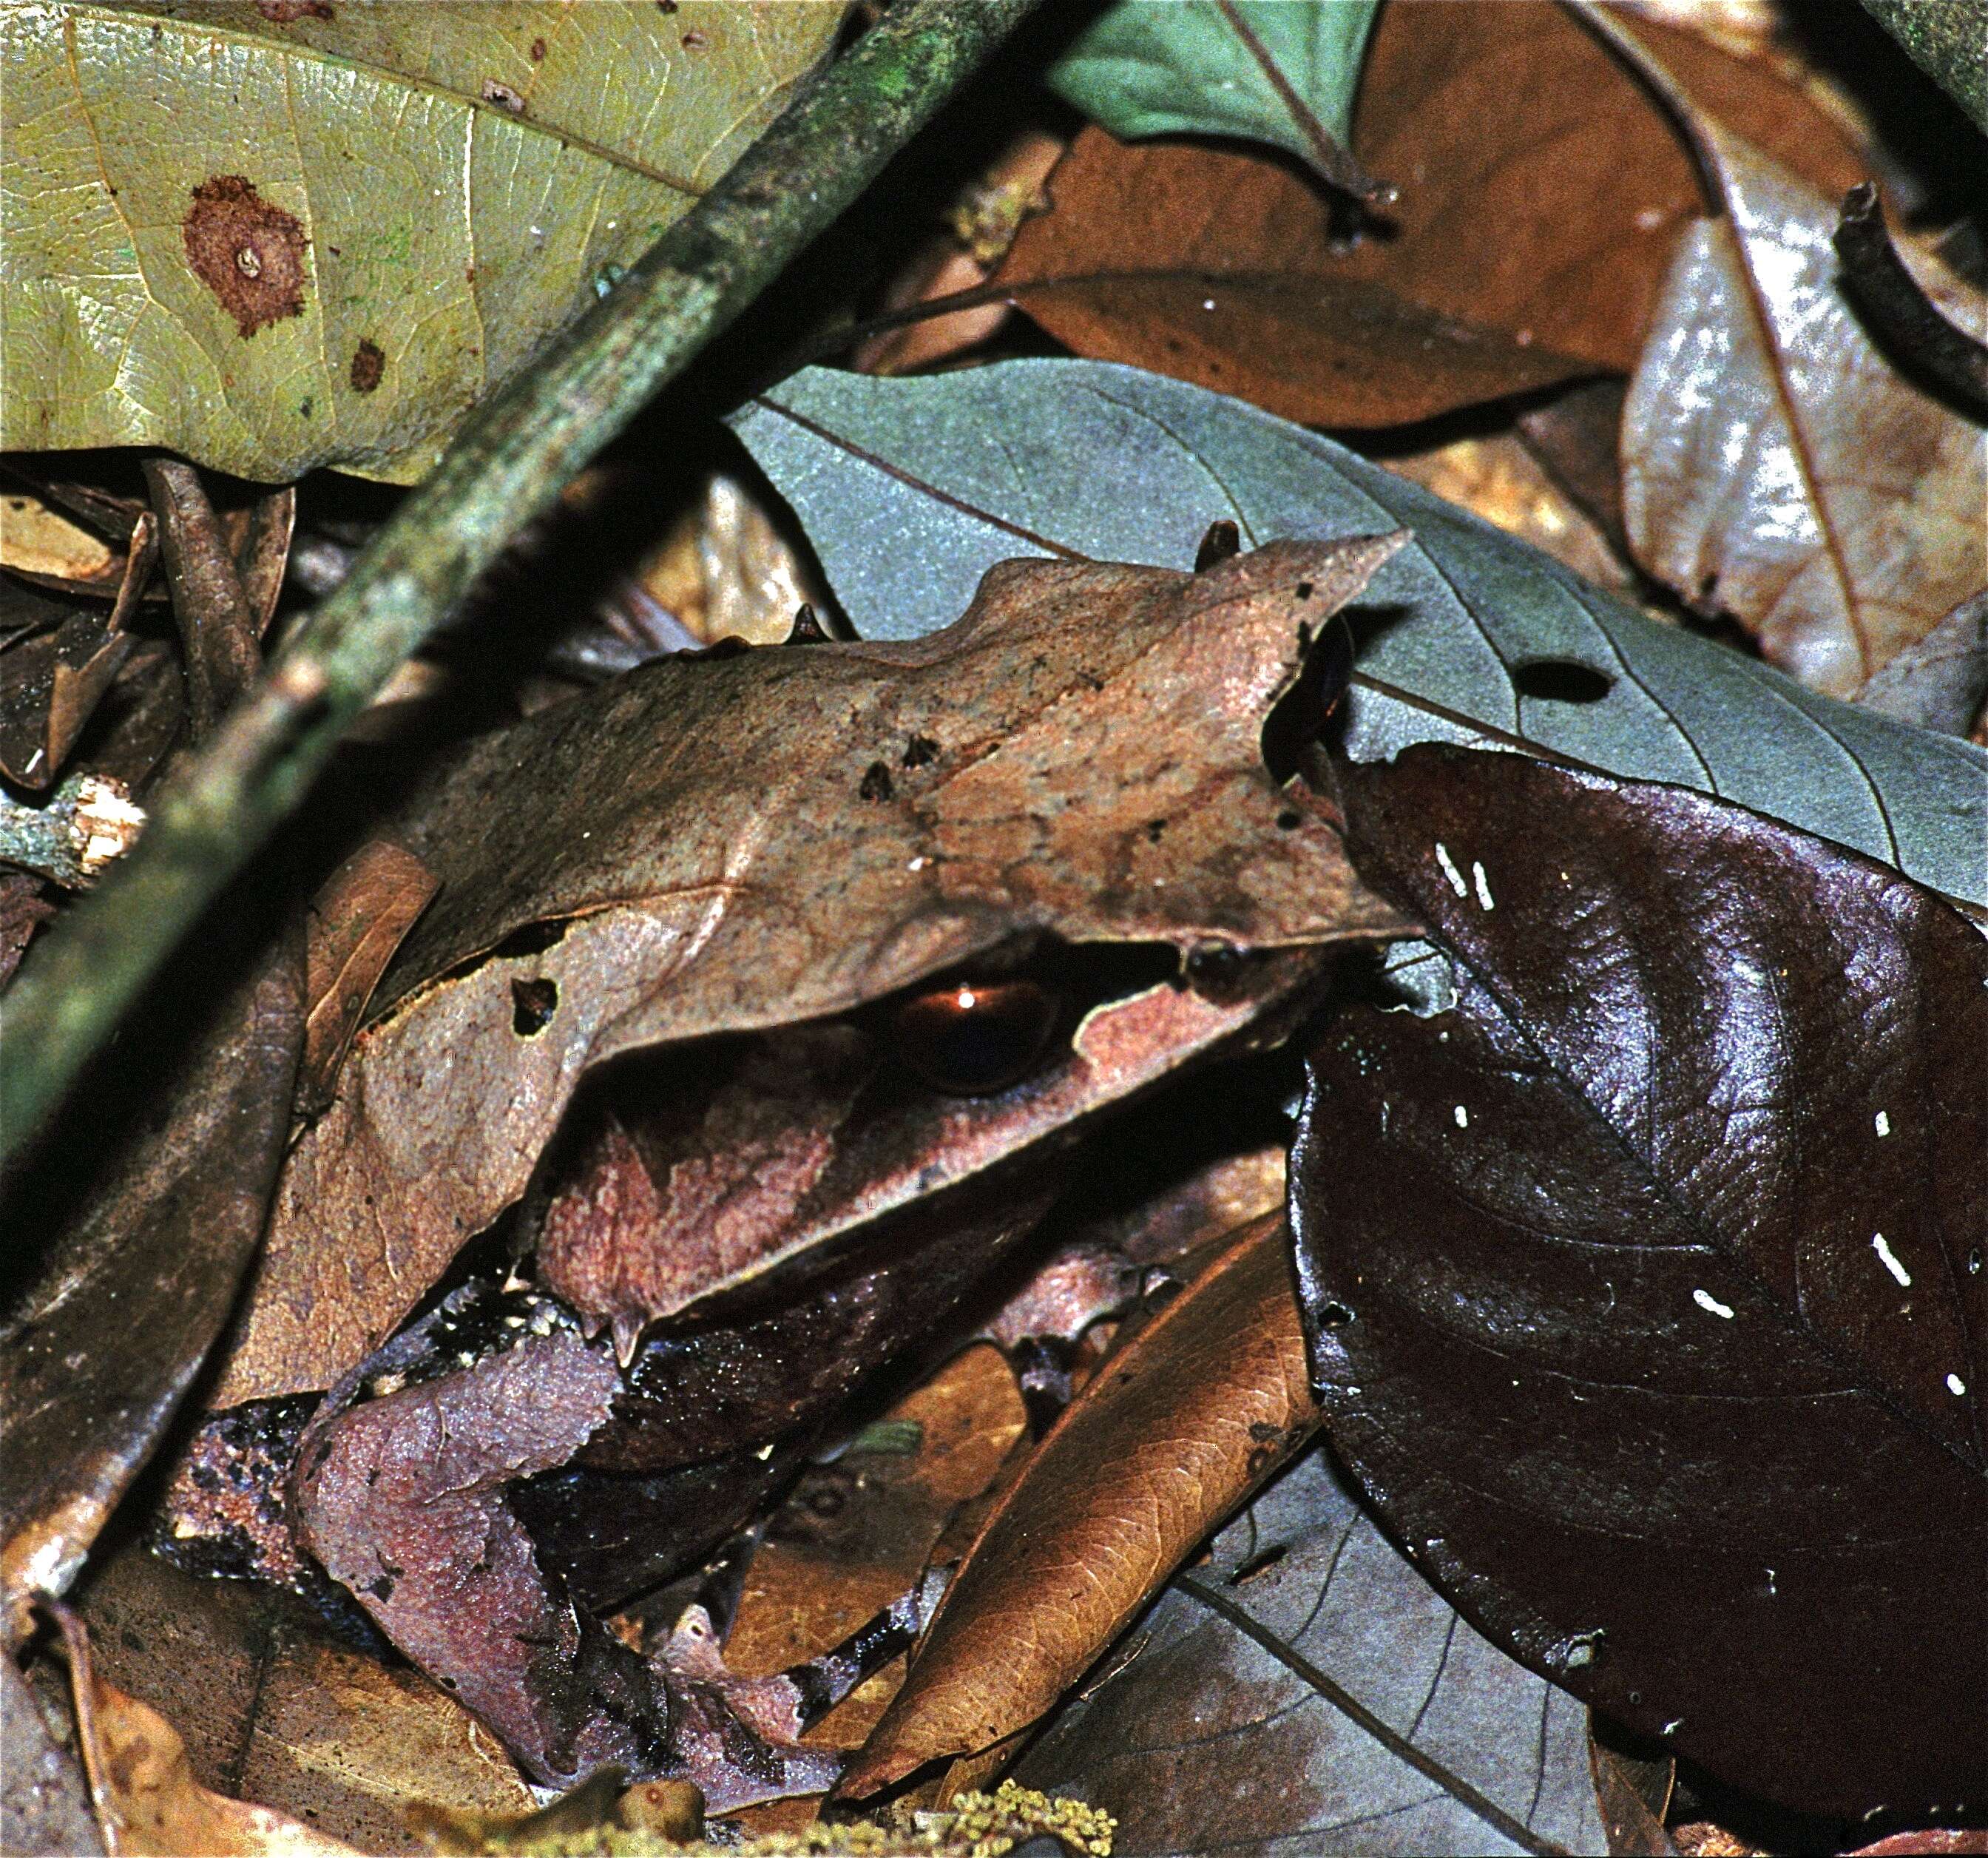 Image of South Asian frogs